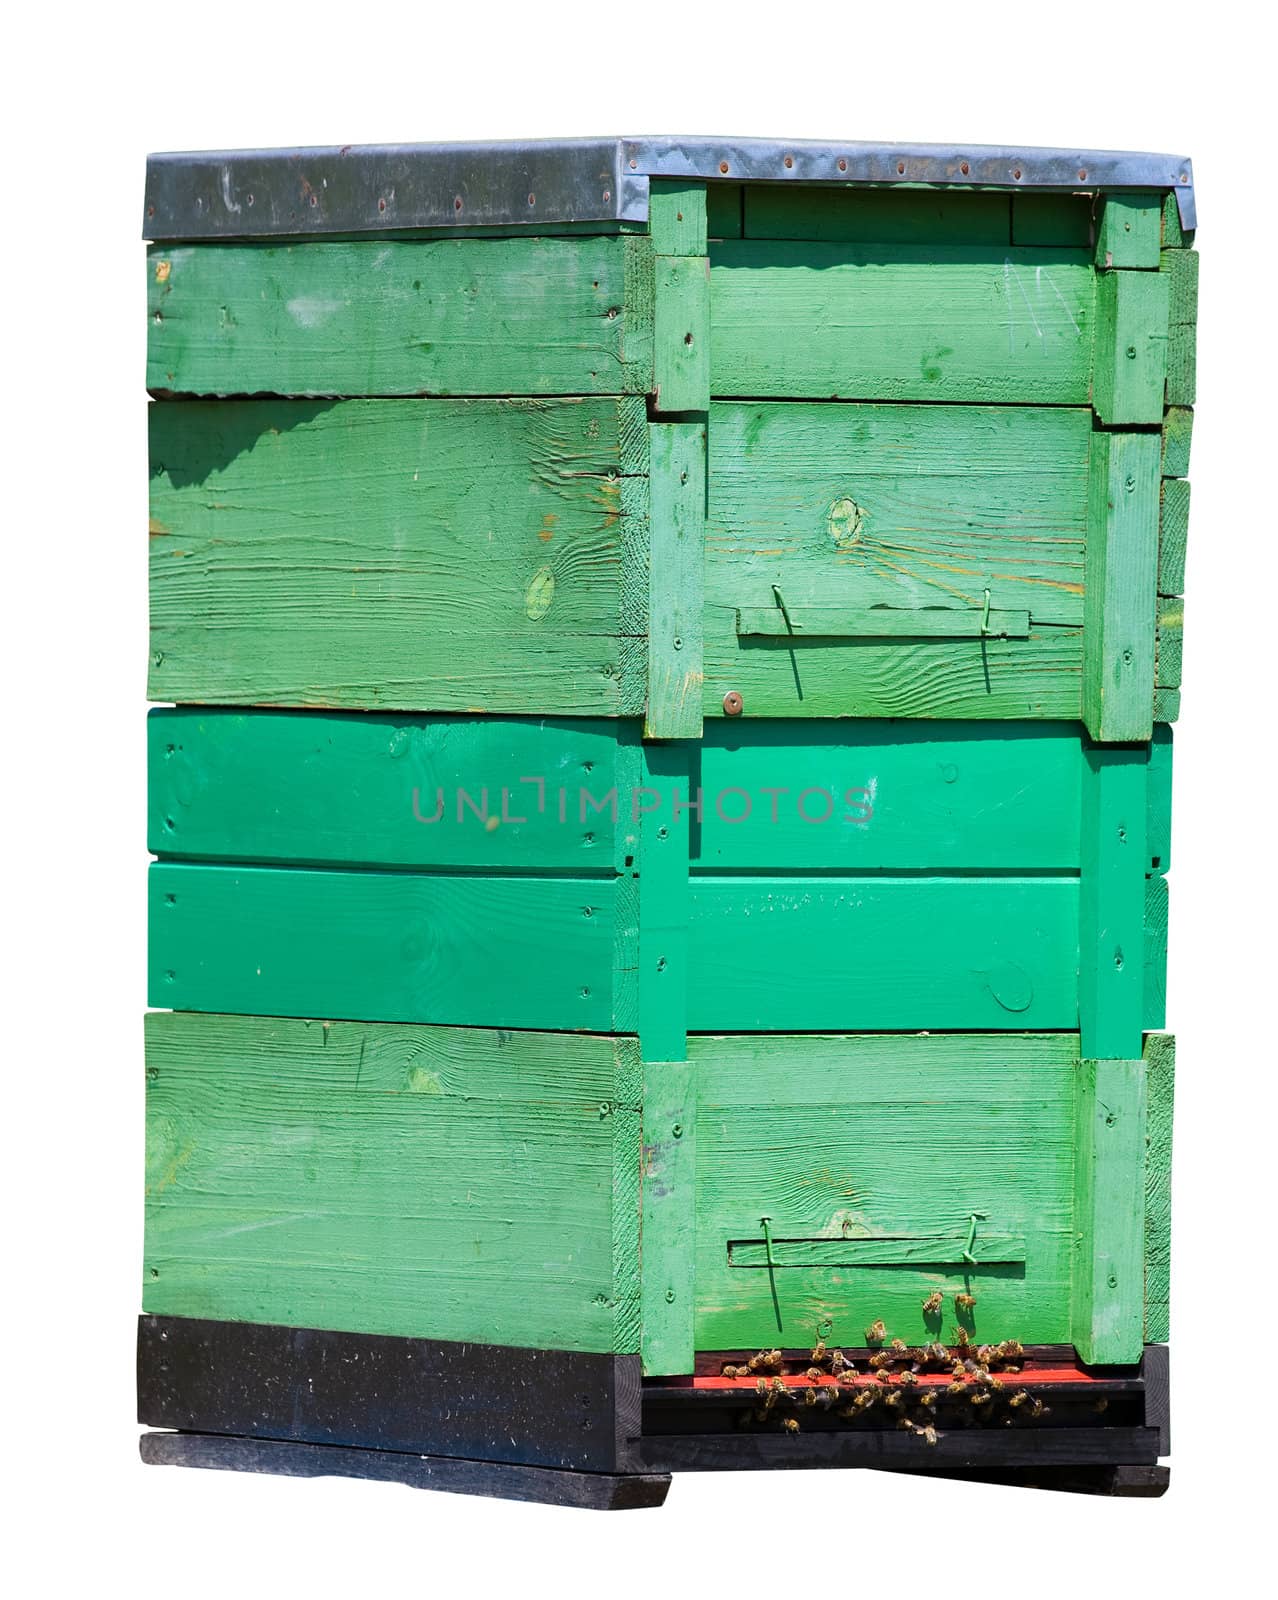 Triditional wooden beehive with lots of bees isolated on white. Clipping path included.